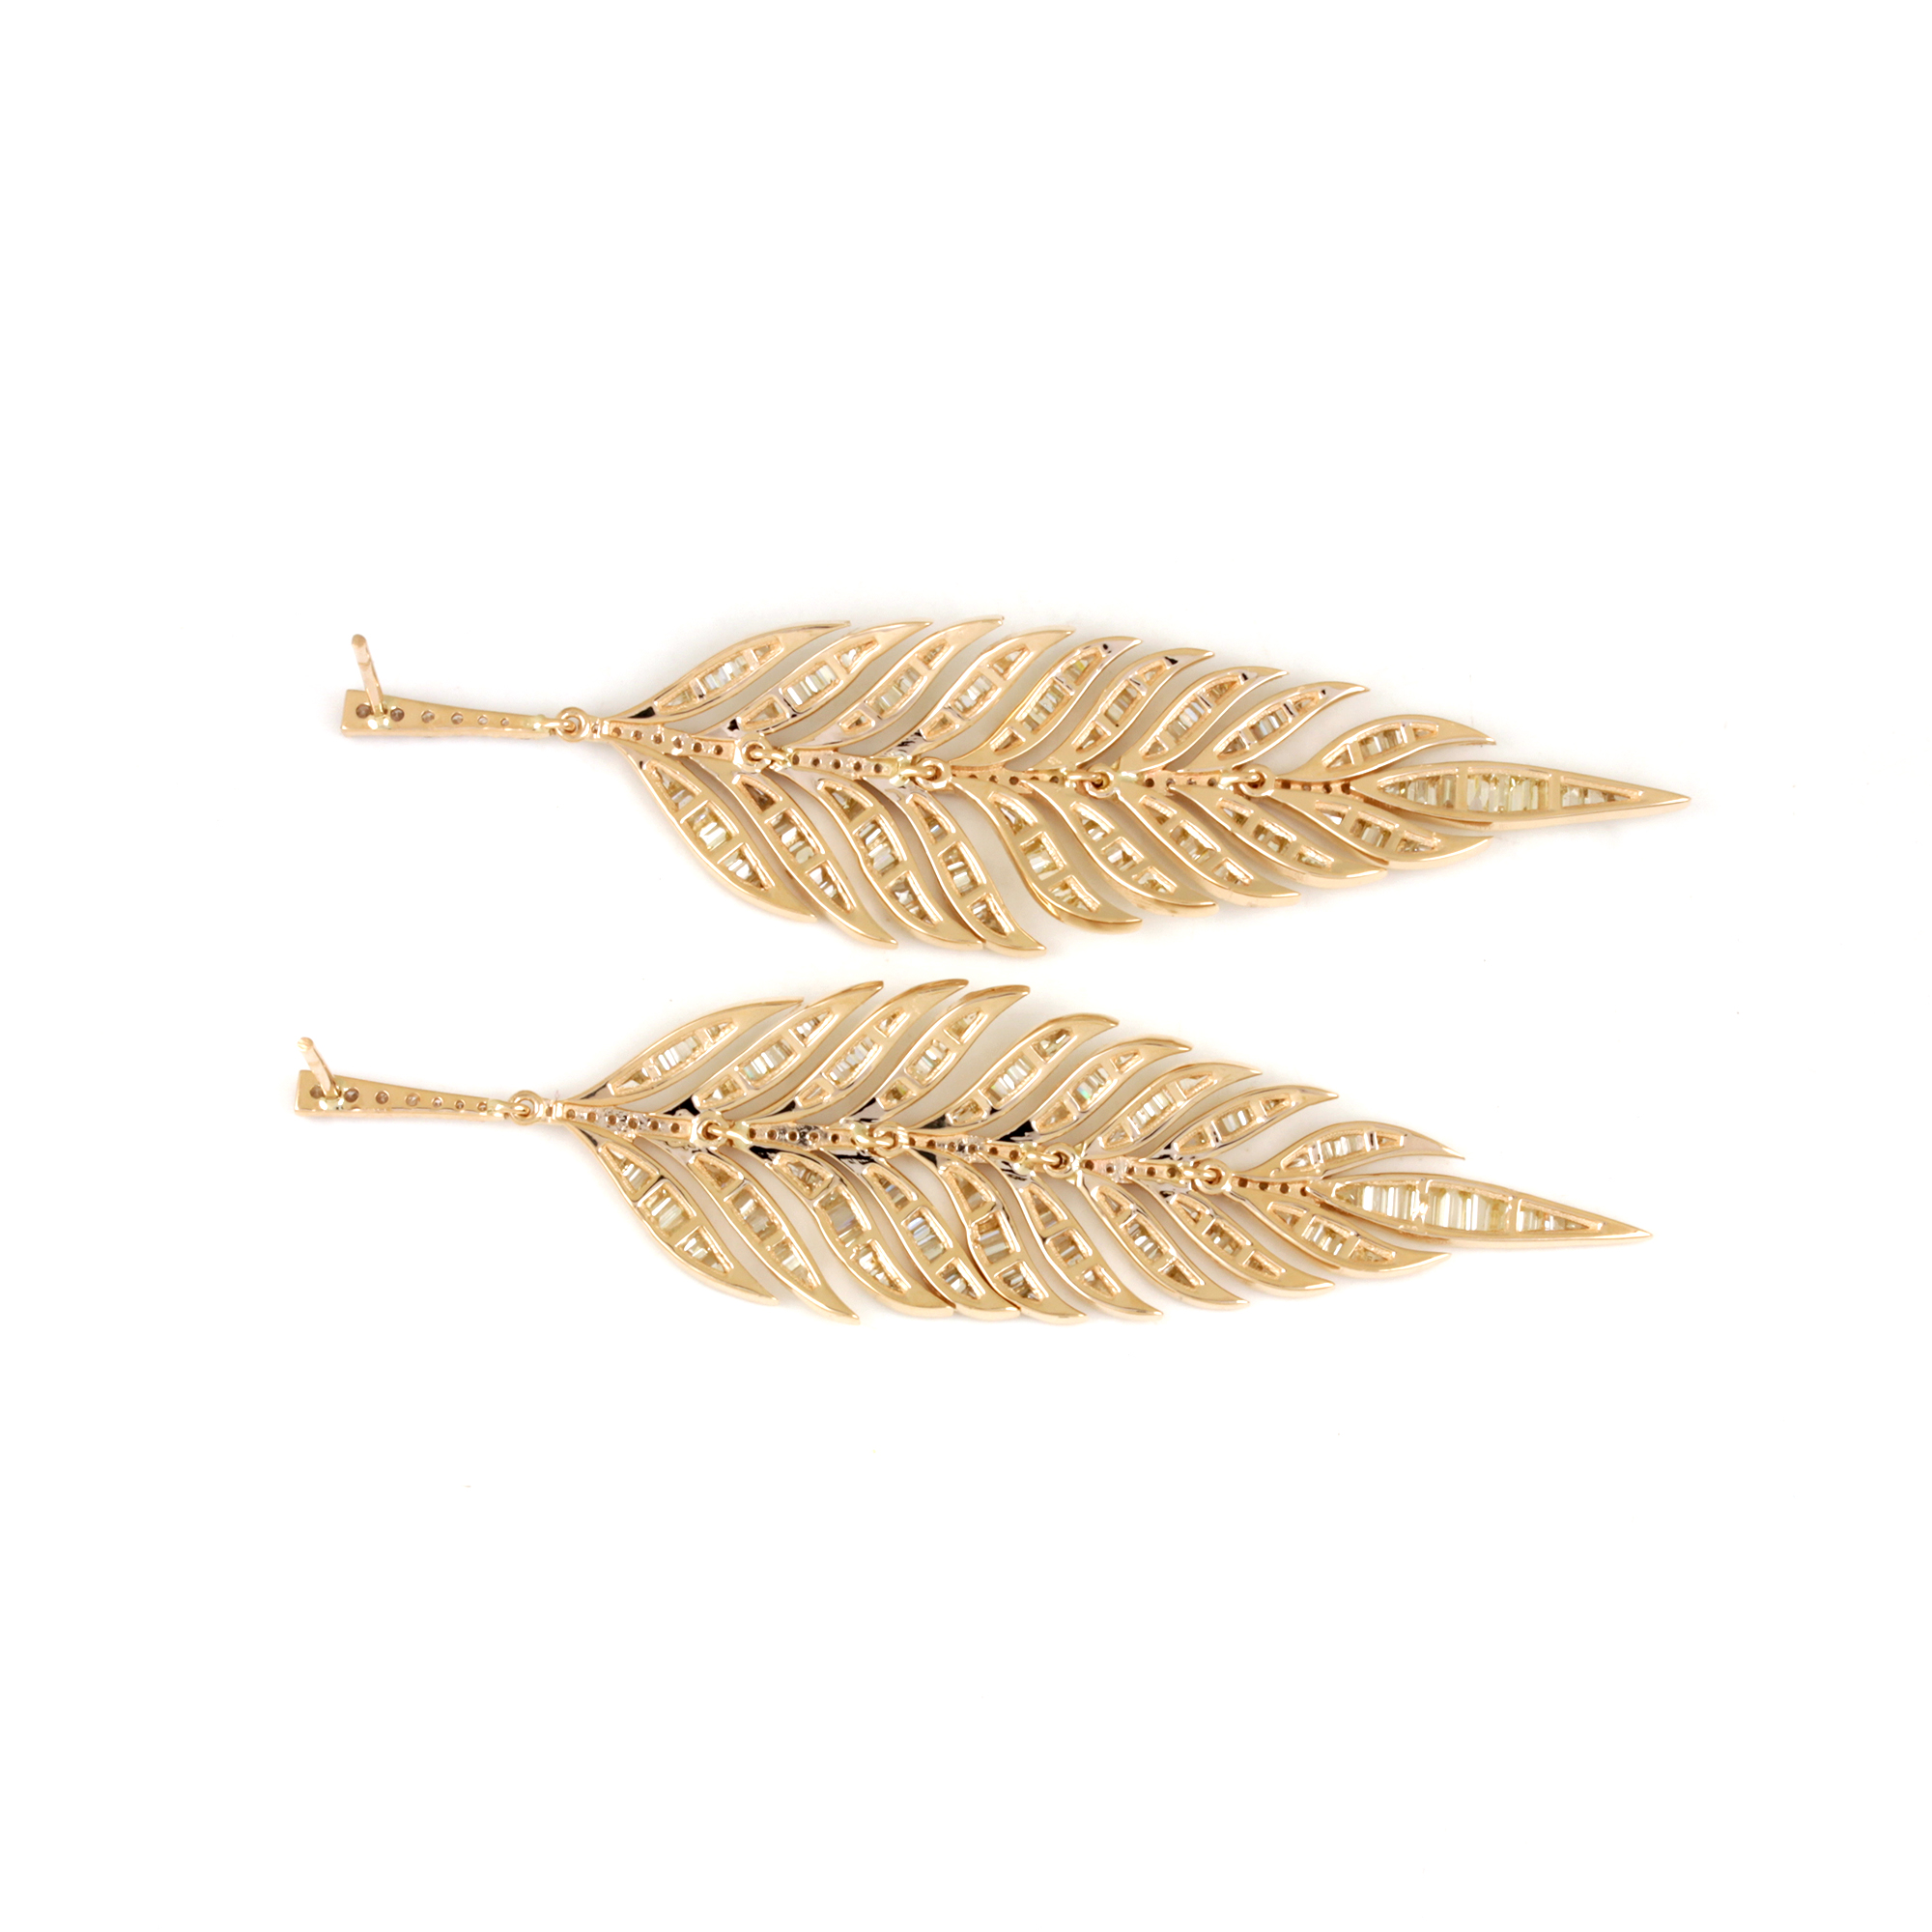 Natural Pave Diamond Feather Dangle Earrings Solid 14K Gold Fine Jewelry